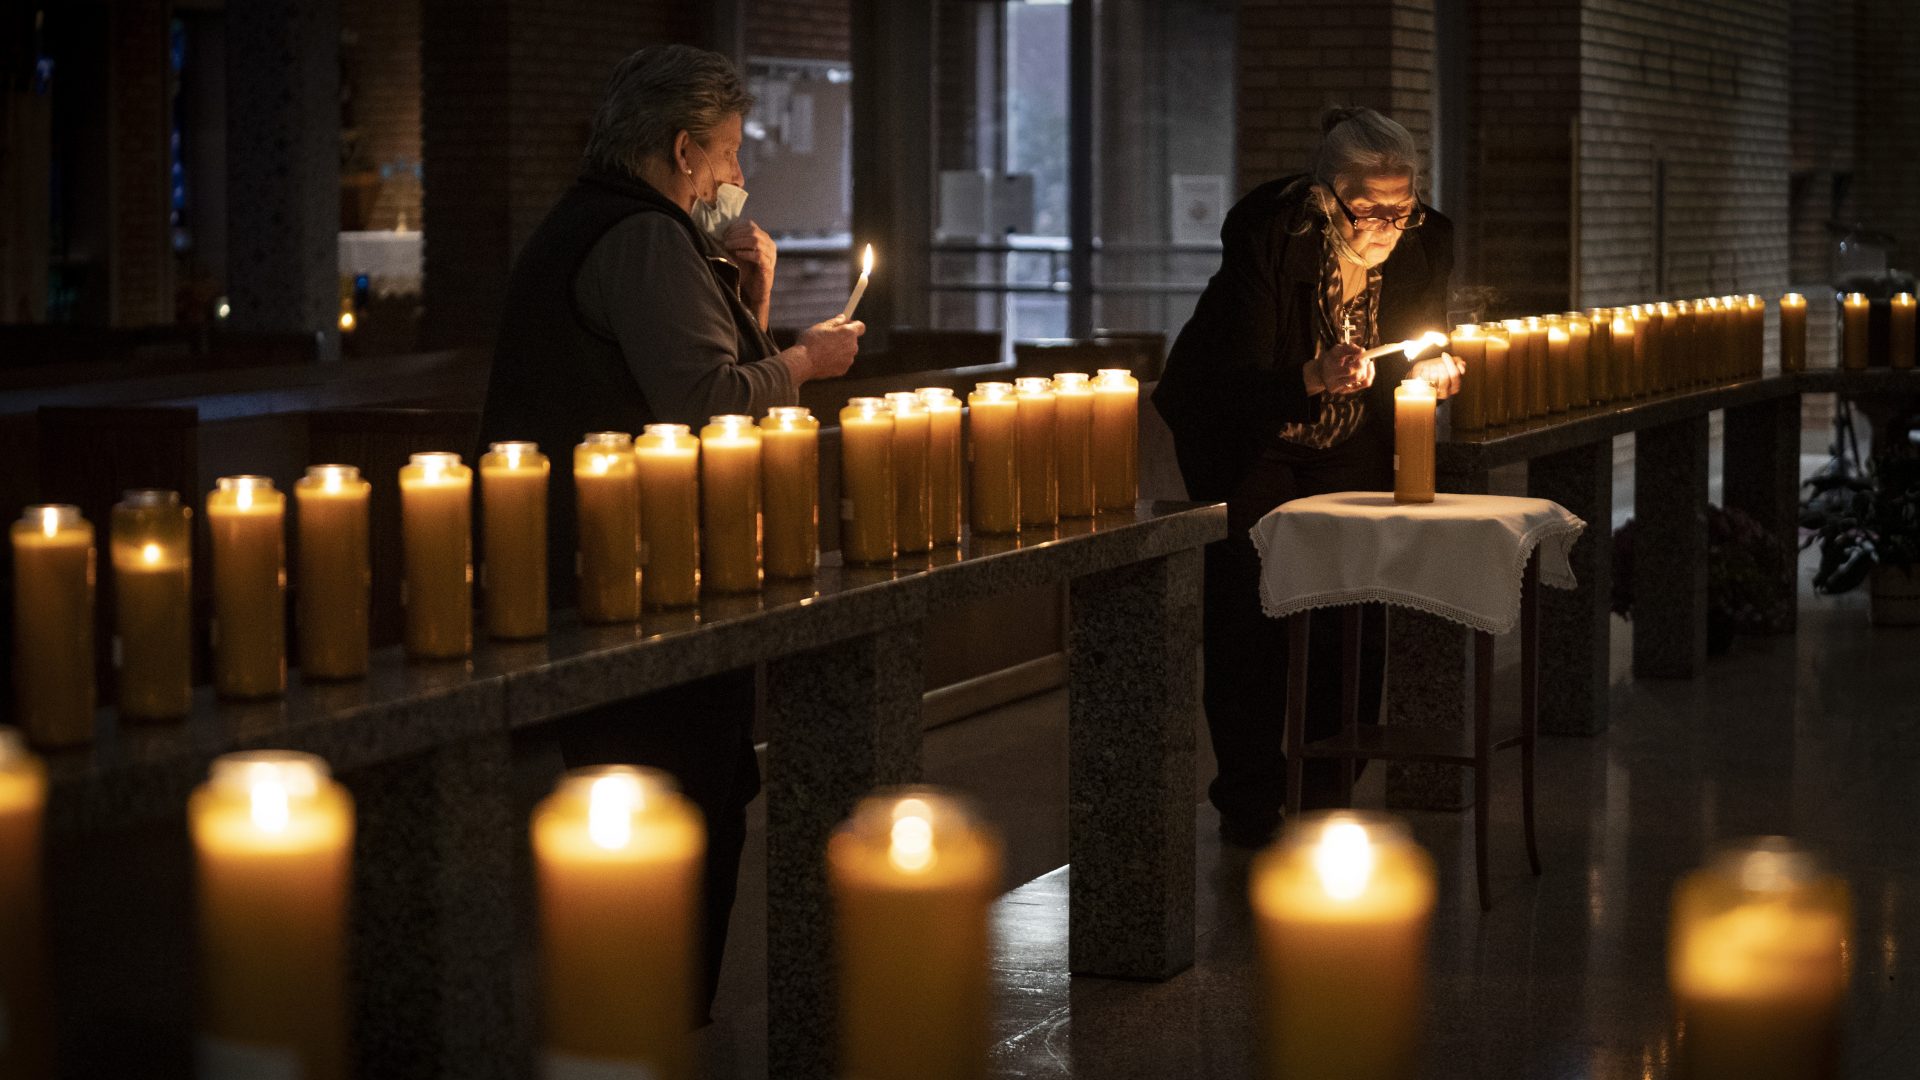 MINNEAPOLIS, MN,- NOVEMBER 2 - Left to right, Jodi Sandlin lit some of the more than 100 candles for loved ones of parish members who have died as Cece Ryan lit a candle in remembrance of those who died of Covid-19 during an All Souls Day service at St Bridget Catholic Church in Minneapolis, Minn., on Monday, November 2, 2020. These candles were for people who have died over the years.